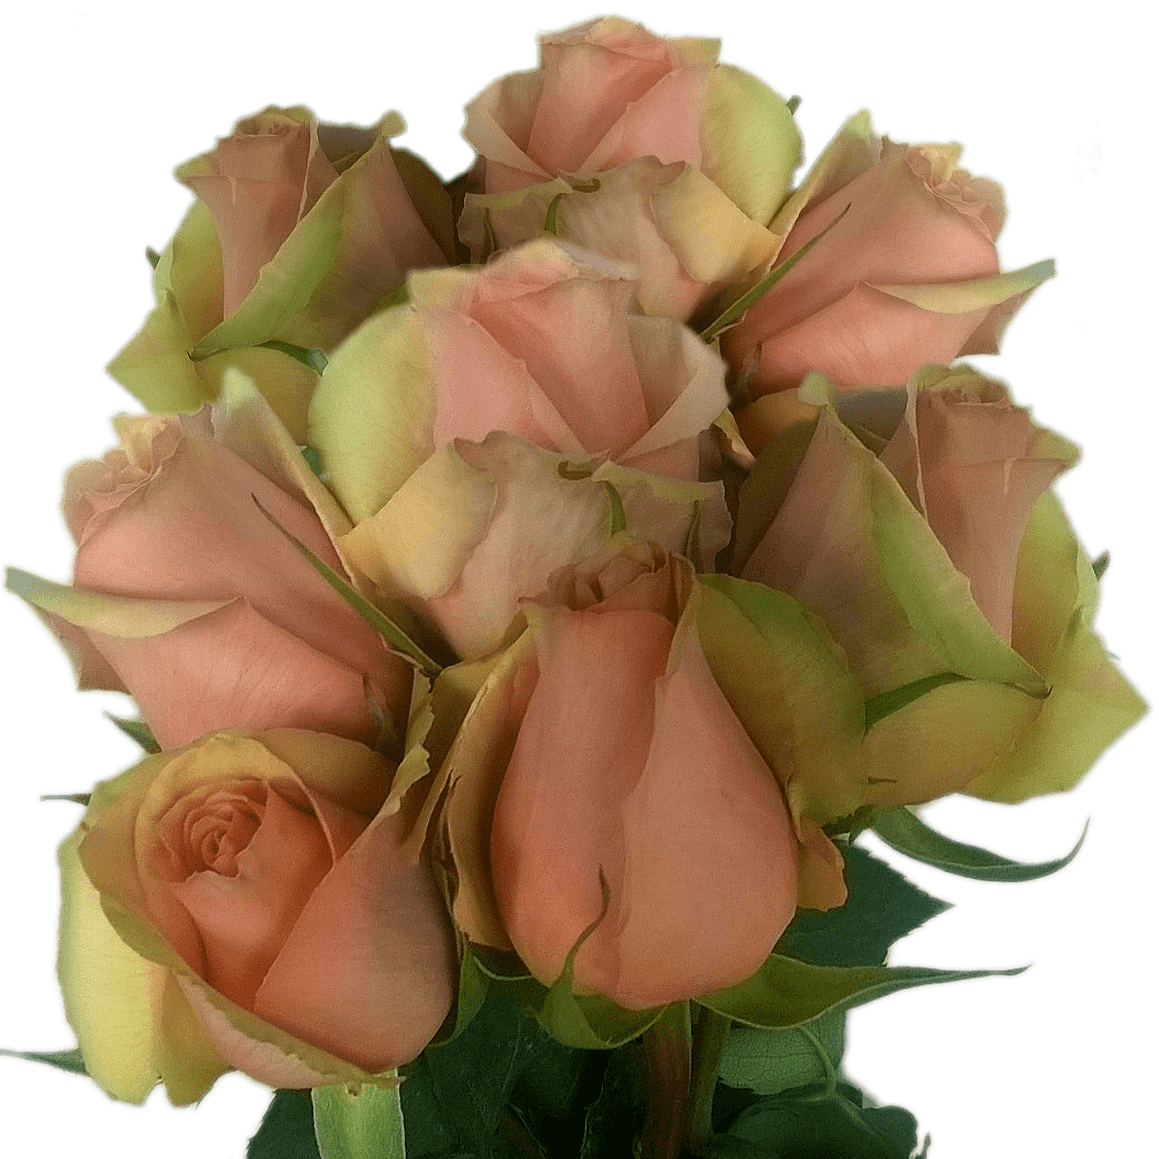 Best Fresh Peach Roses for Delivery Roses On Sale Cheap Peach Roses